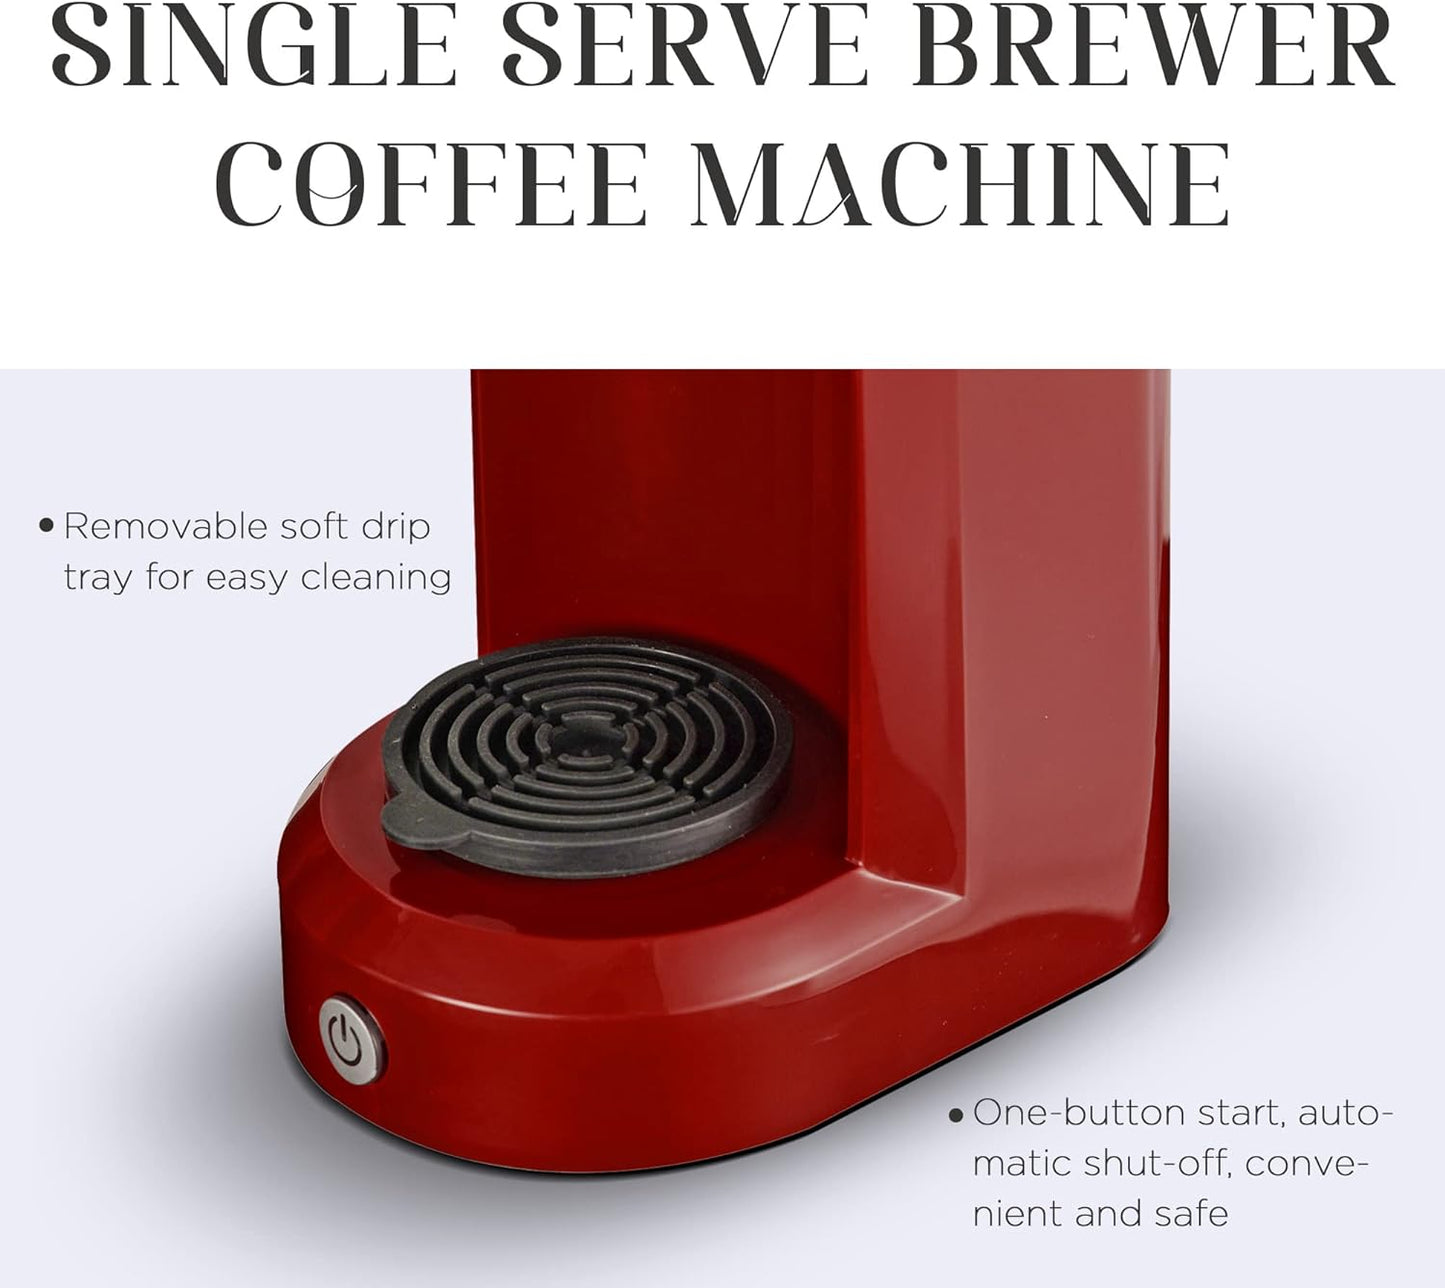 Sunvivi Coffee Maker, Single Serve Brewer for Single Cup, With Permanent Filter, 6oz to 14oz Mug, One-touch Control Button with Illumination,Red (ETL Certified)